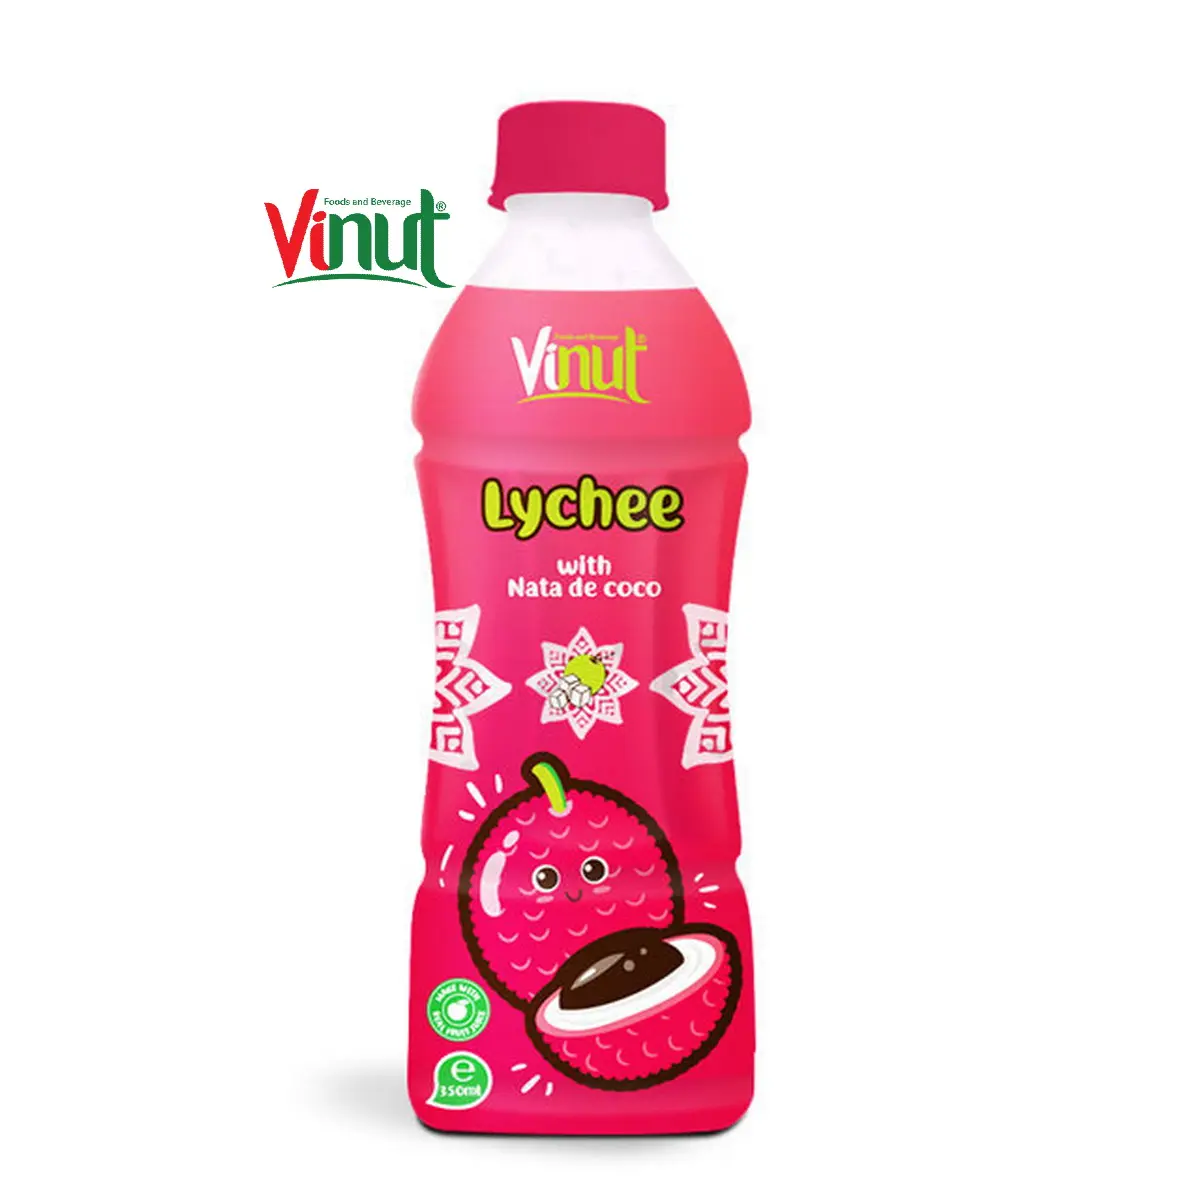 350ml Bottled Lychee Juice with nata de coco High Quality Fruit Juice Lychee Juice with nata de coco Manufacturer From Vietnam